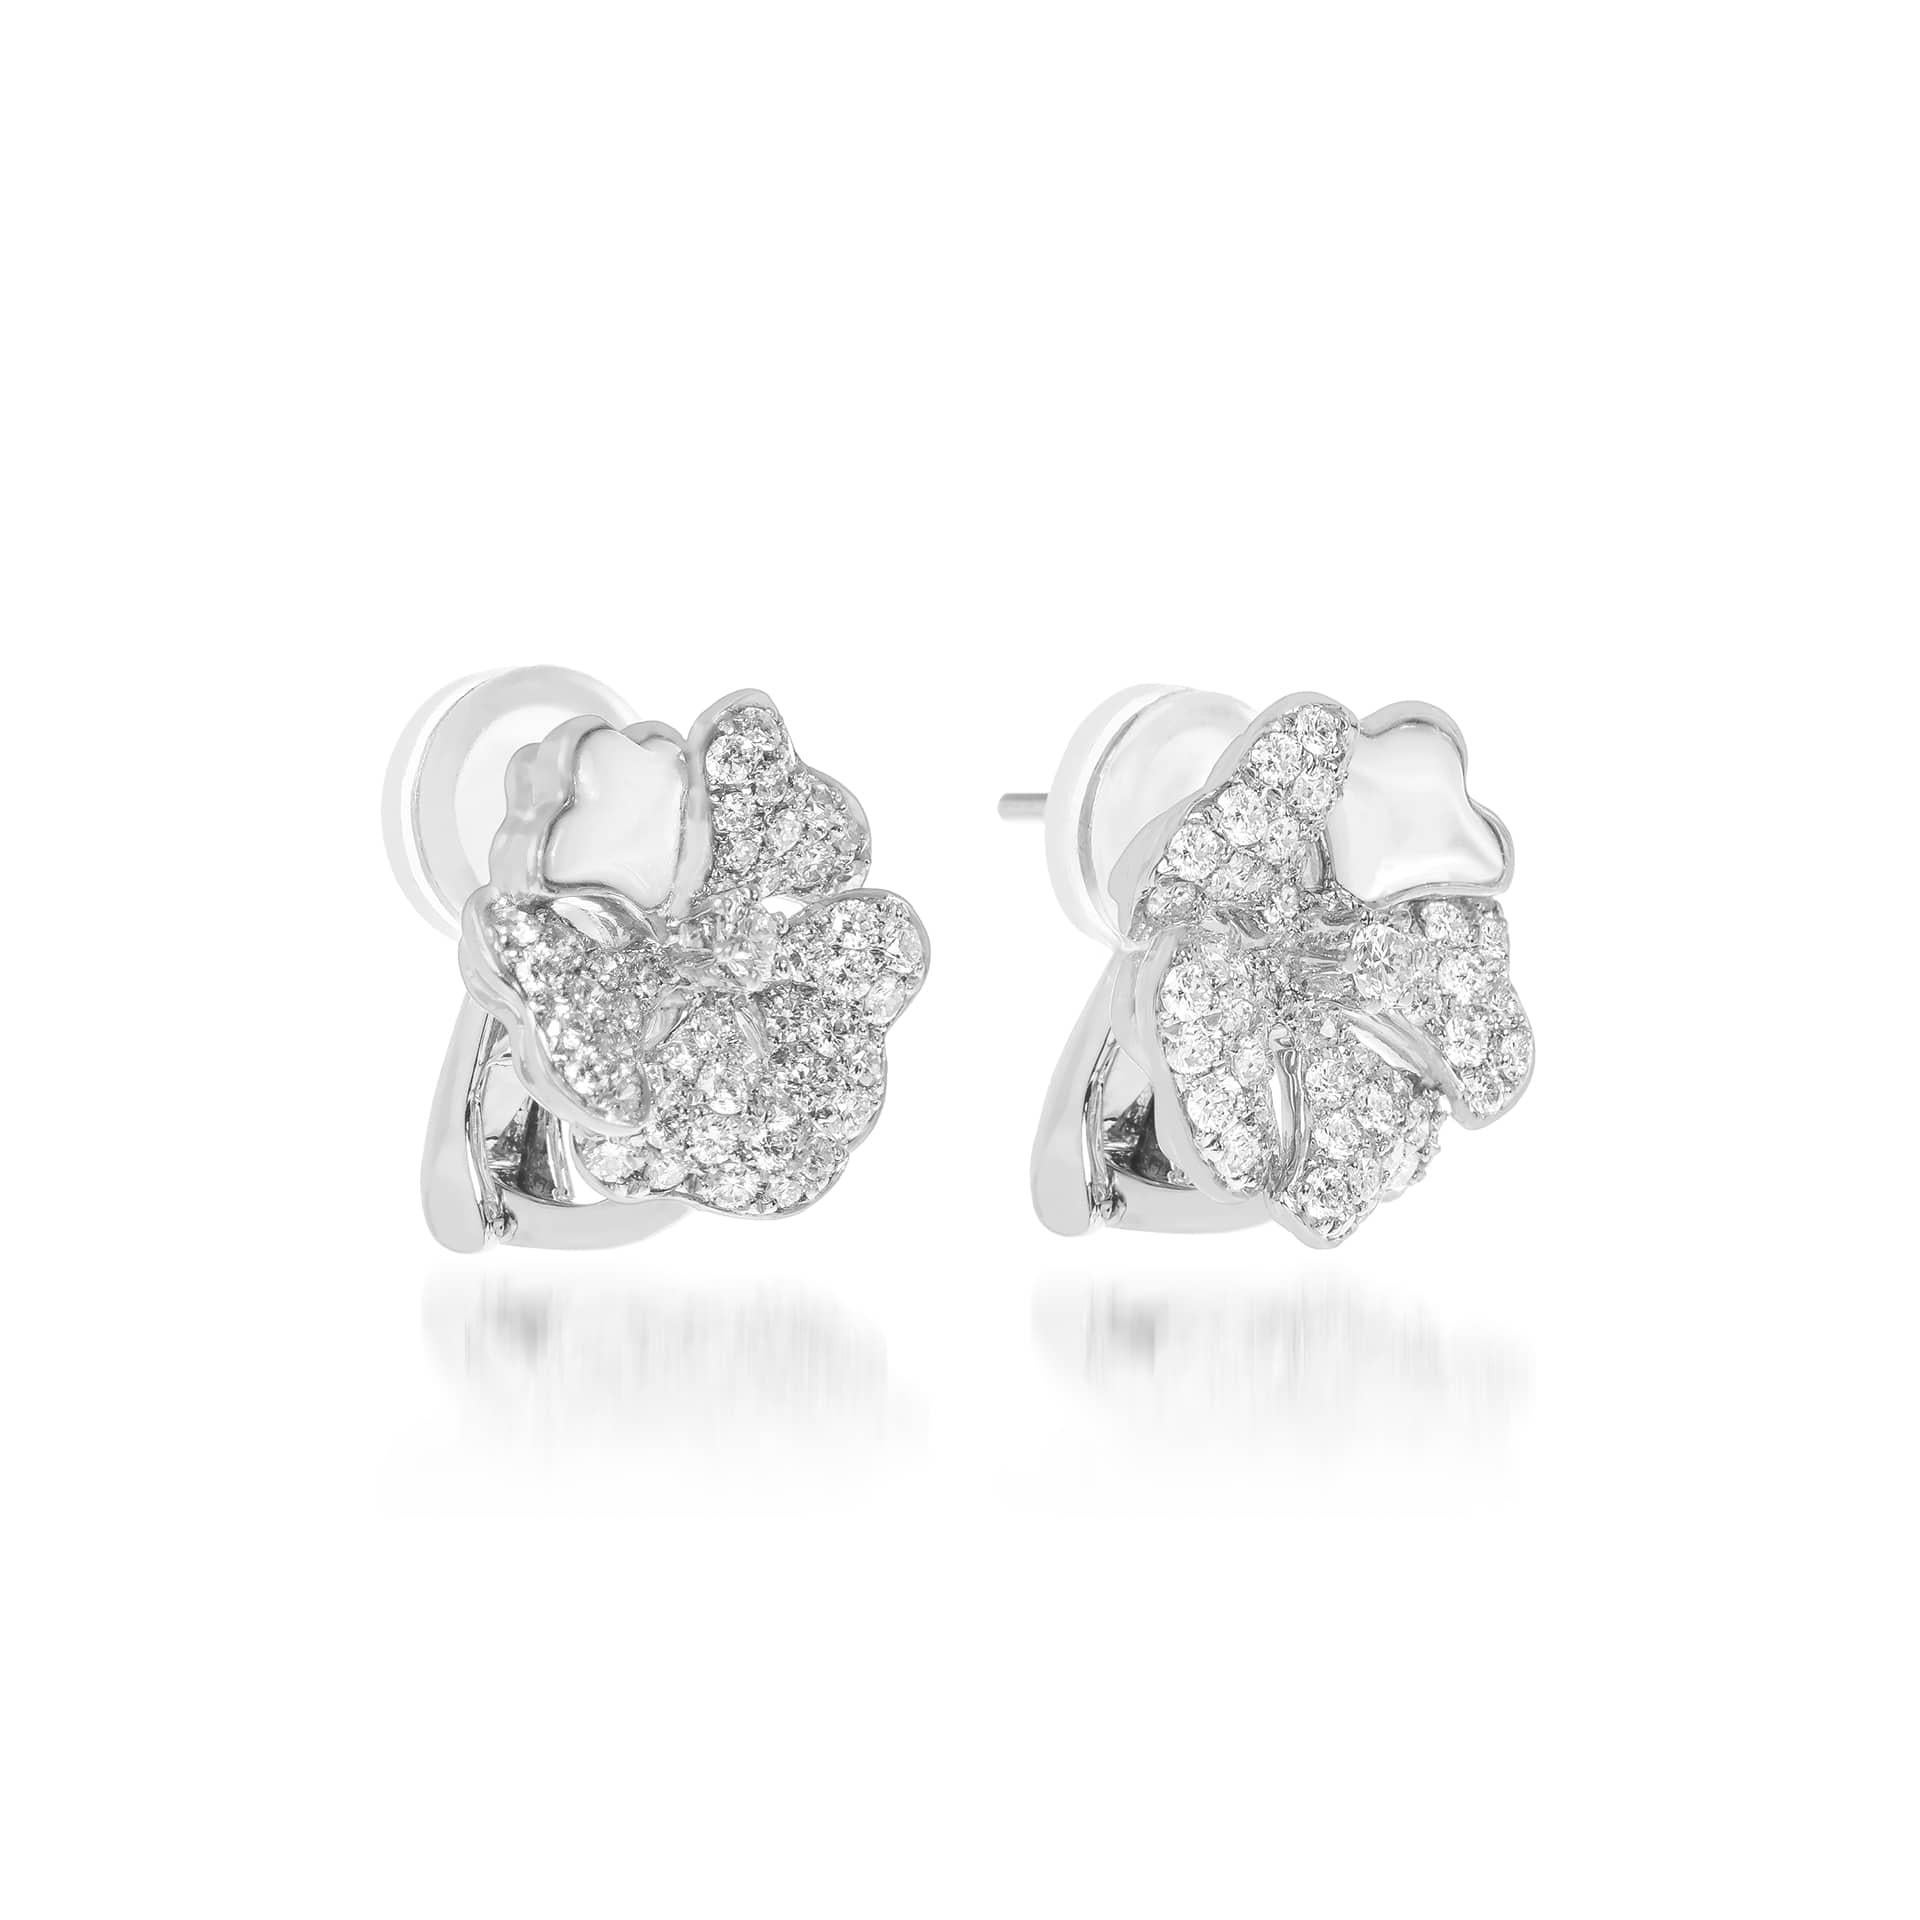 Bloom Diamond and White Mother-of-Pearl Bloom Earring Tops in 18K White Gold

Inspired by the exquisite petals of the alpine cinquefoil, the Bloom collection contrasts the richness of diamonds and precious metals with the light versatility of this